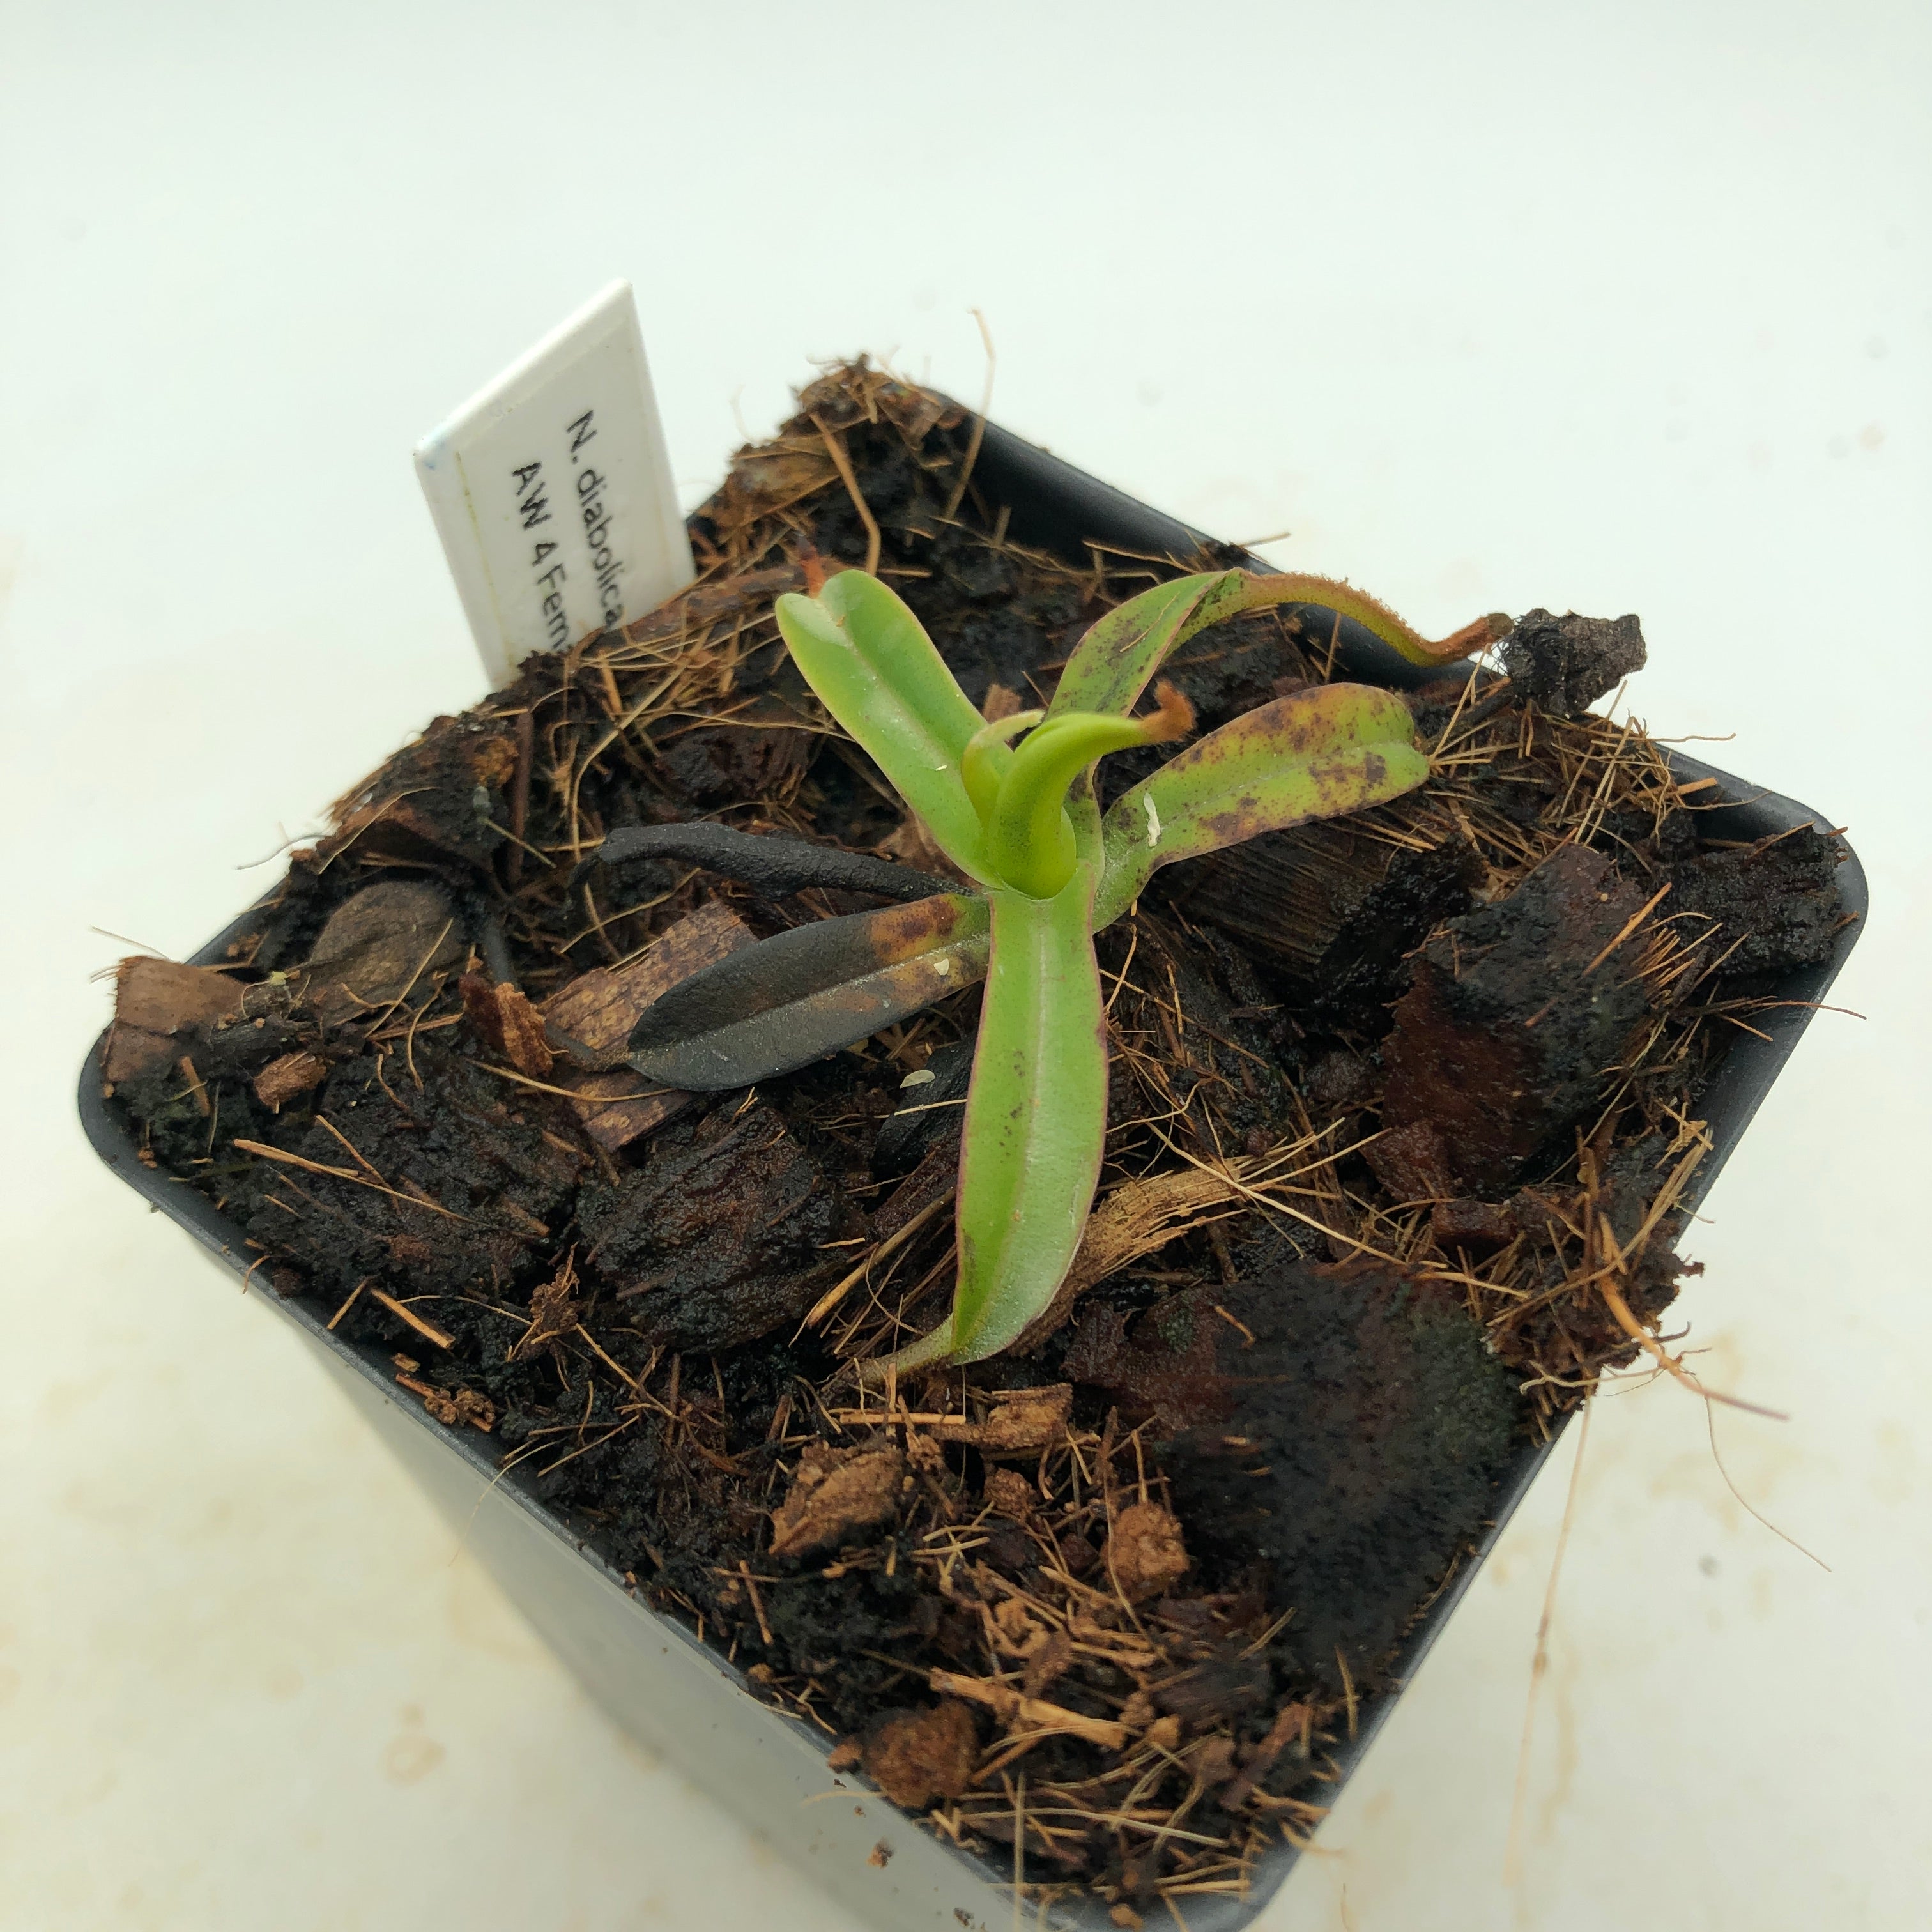 Nepenthes Clone 4